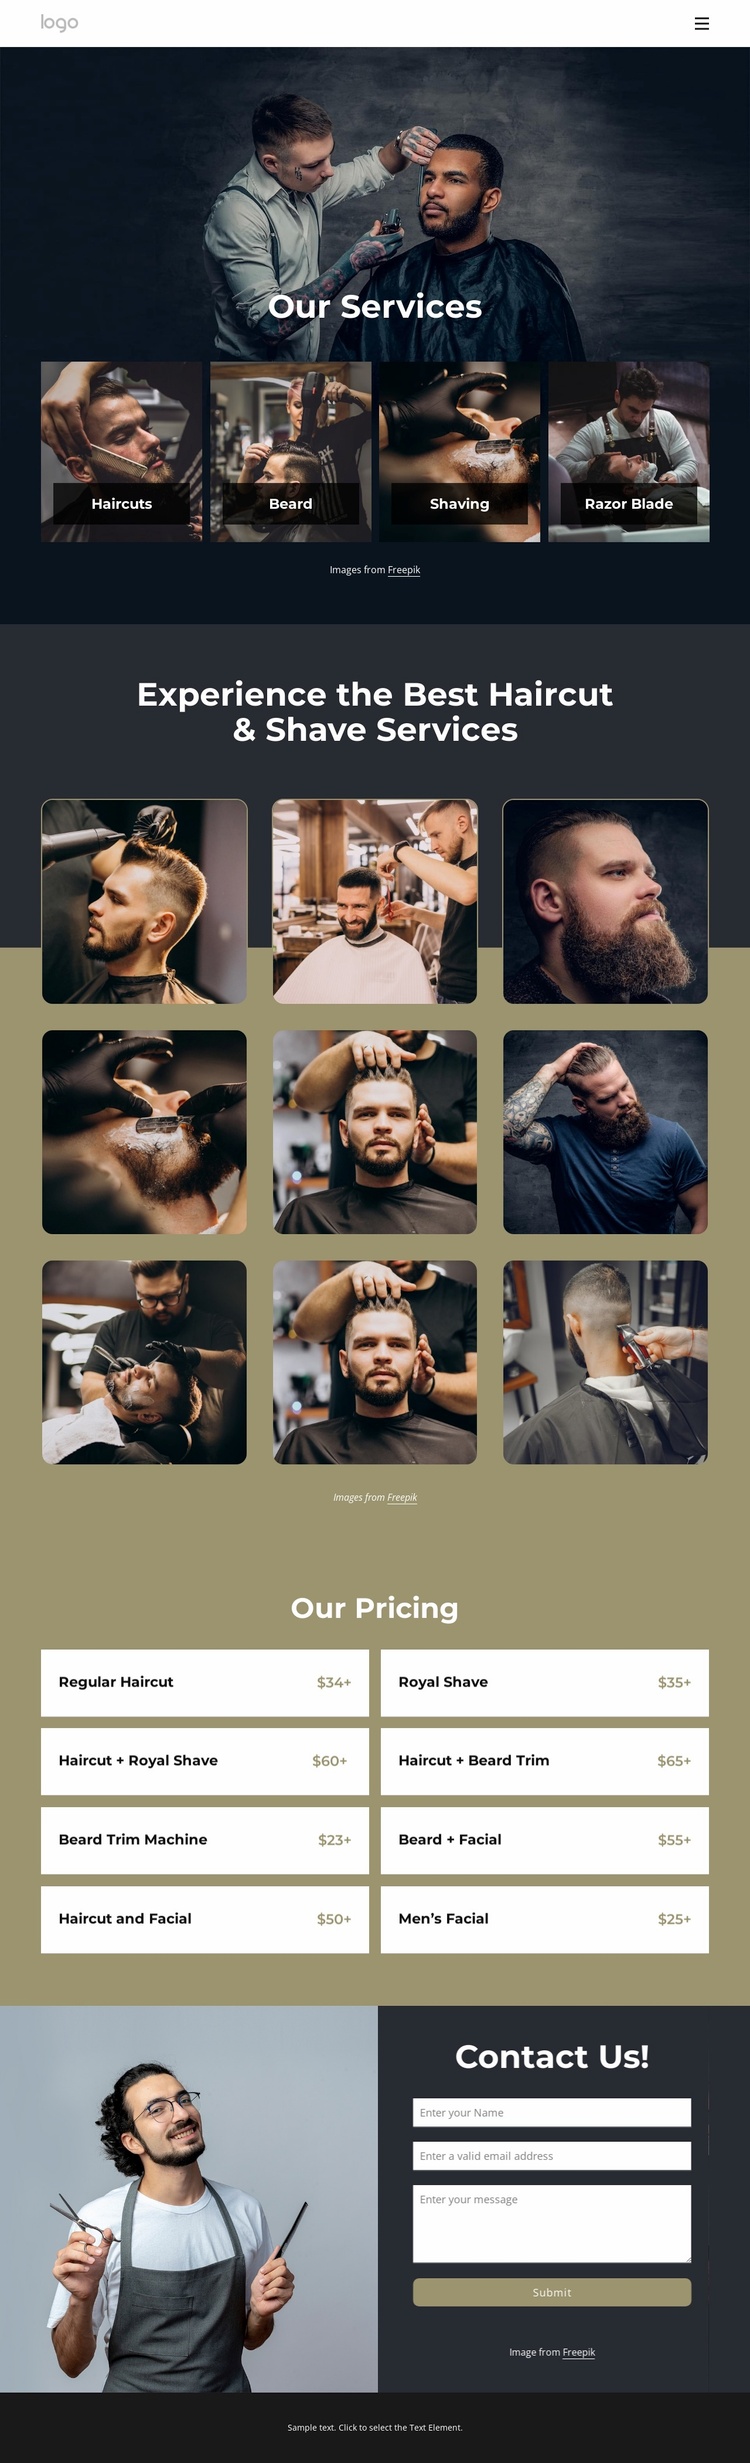 Best haircut and shave services Landing Page